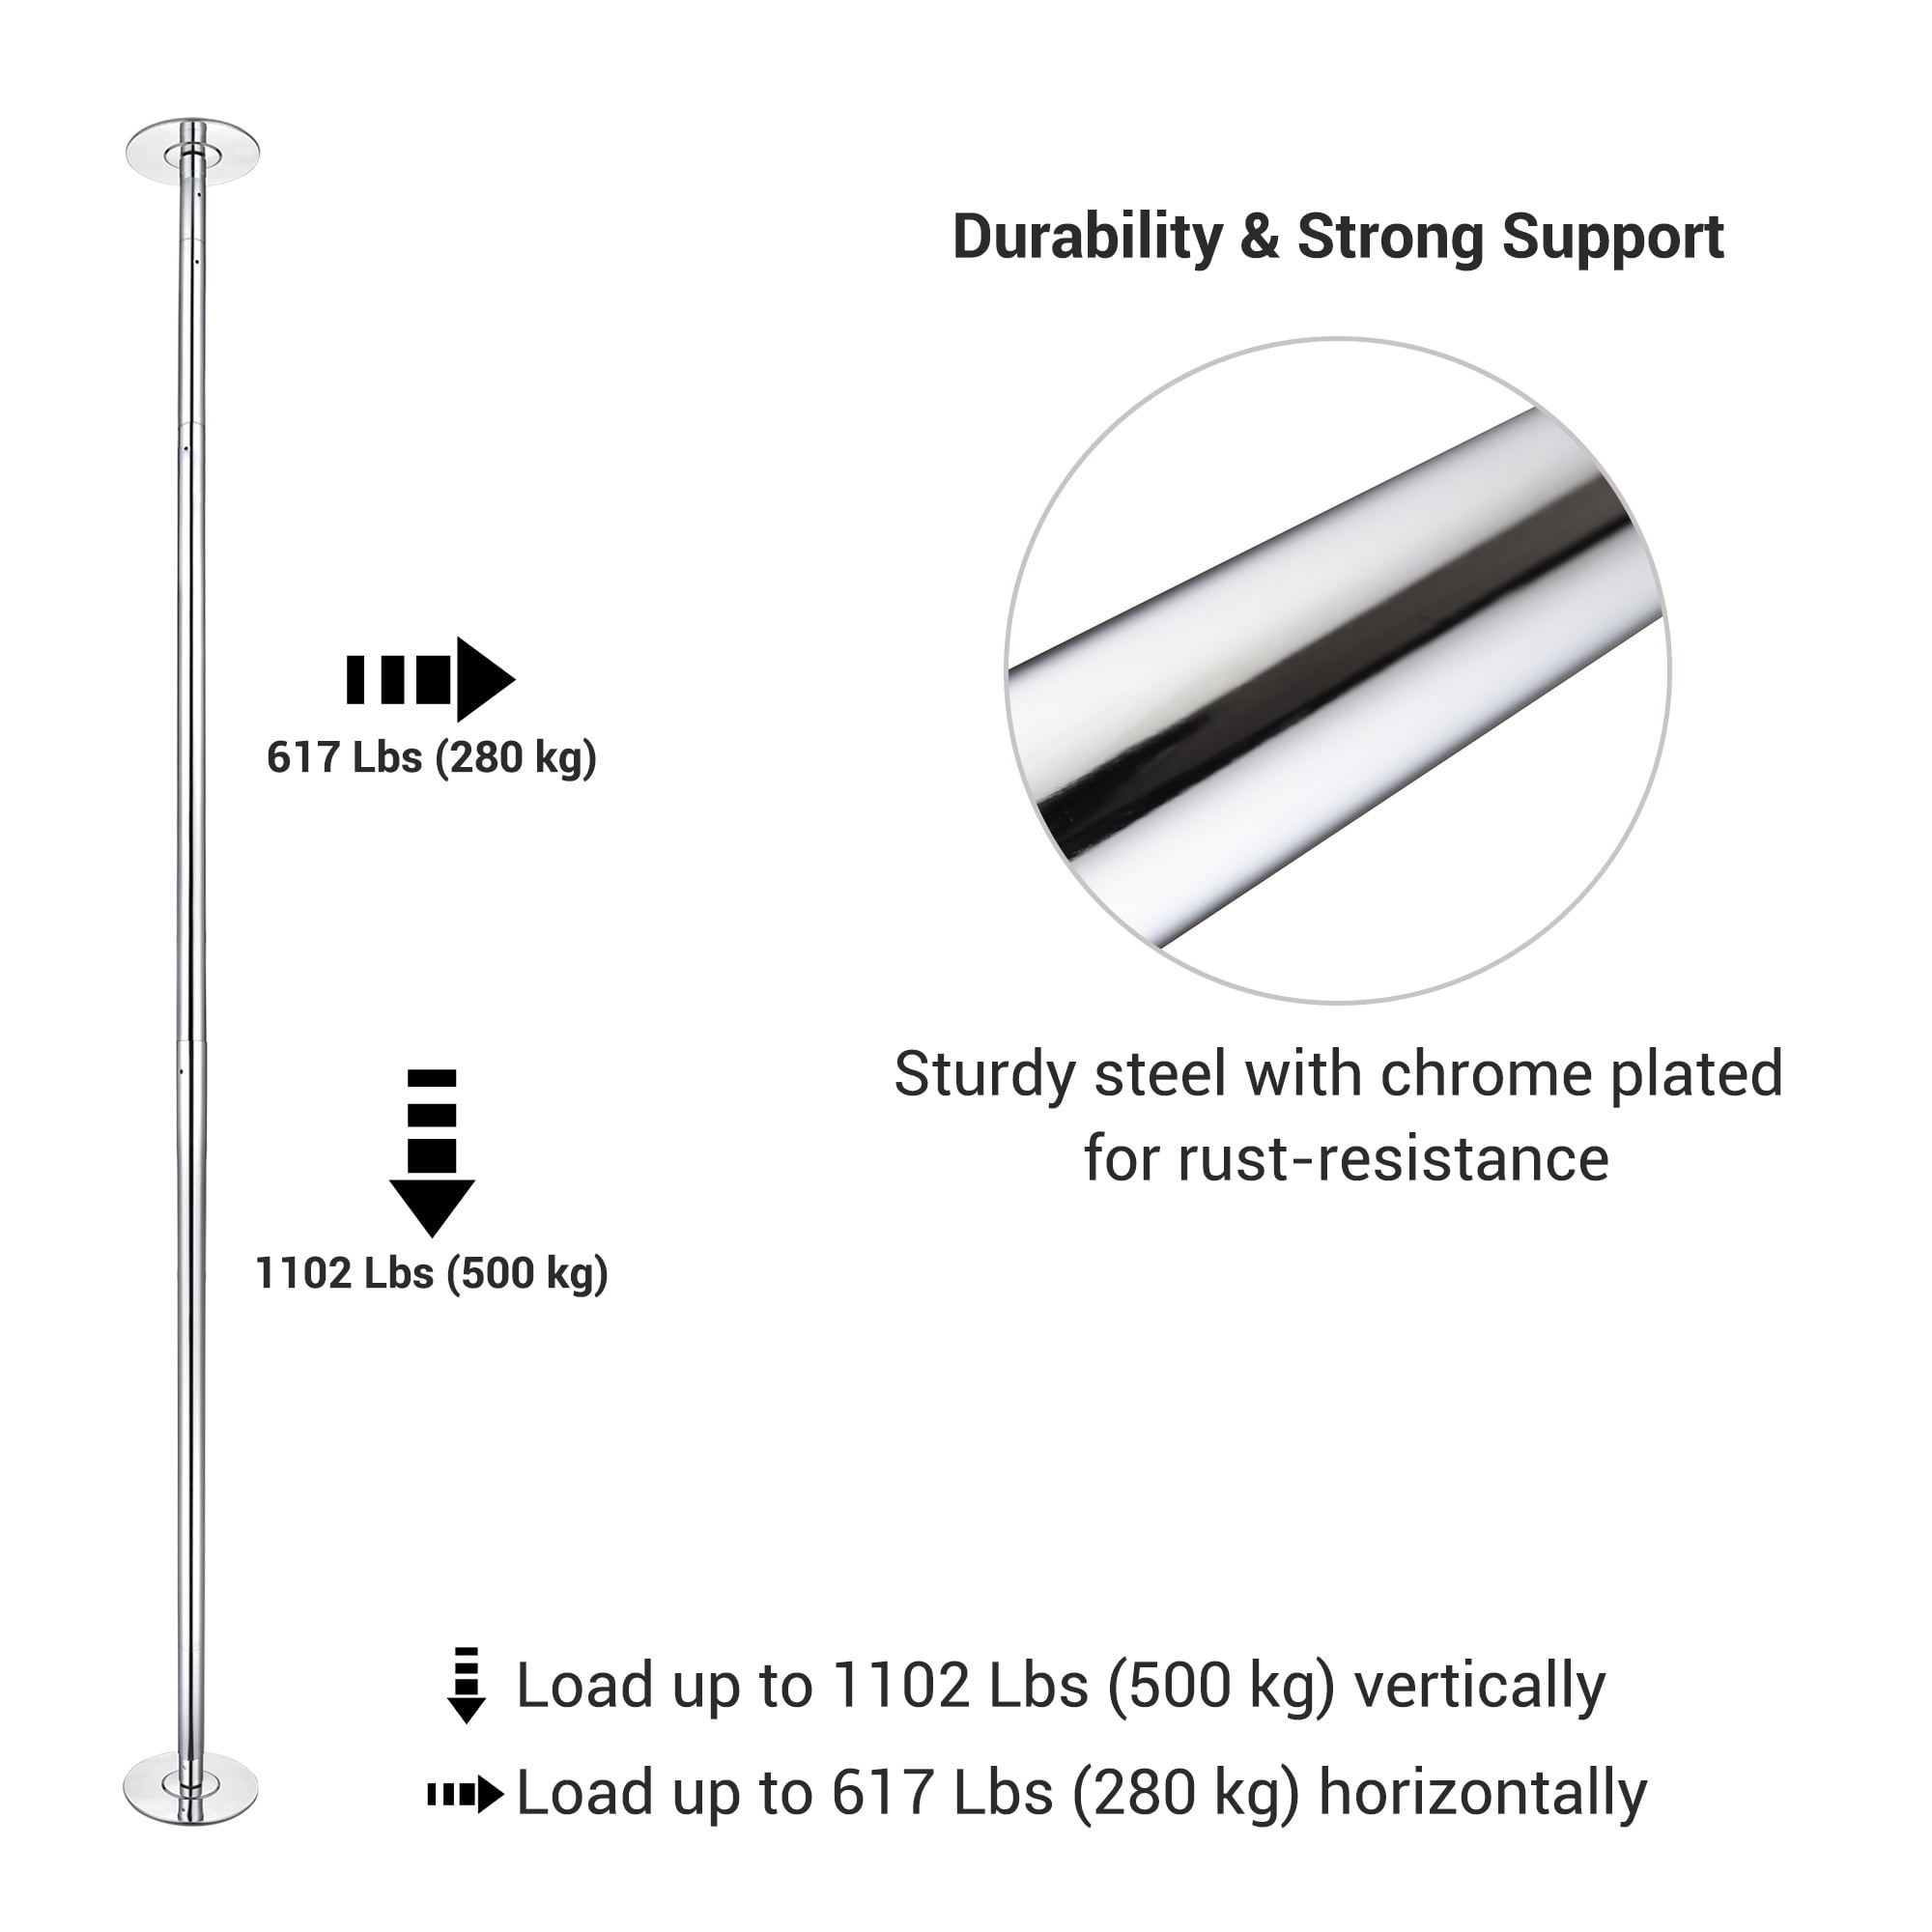 45mm Dance Pole Kit Portable Static Spinning Fitness Exercise with 2 Extensions 